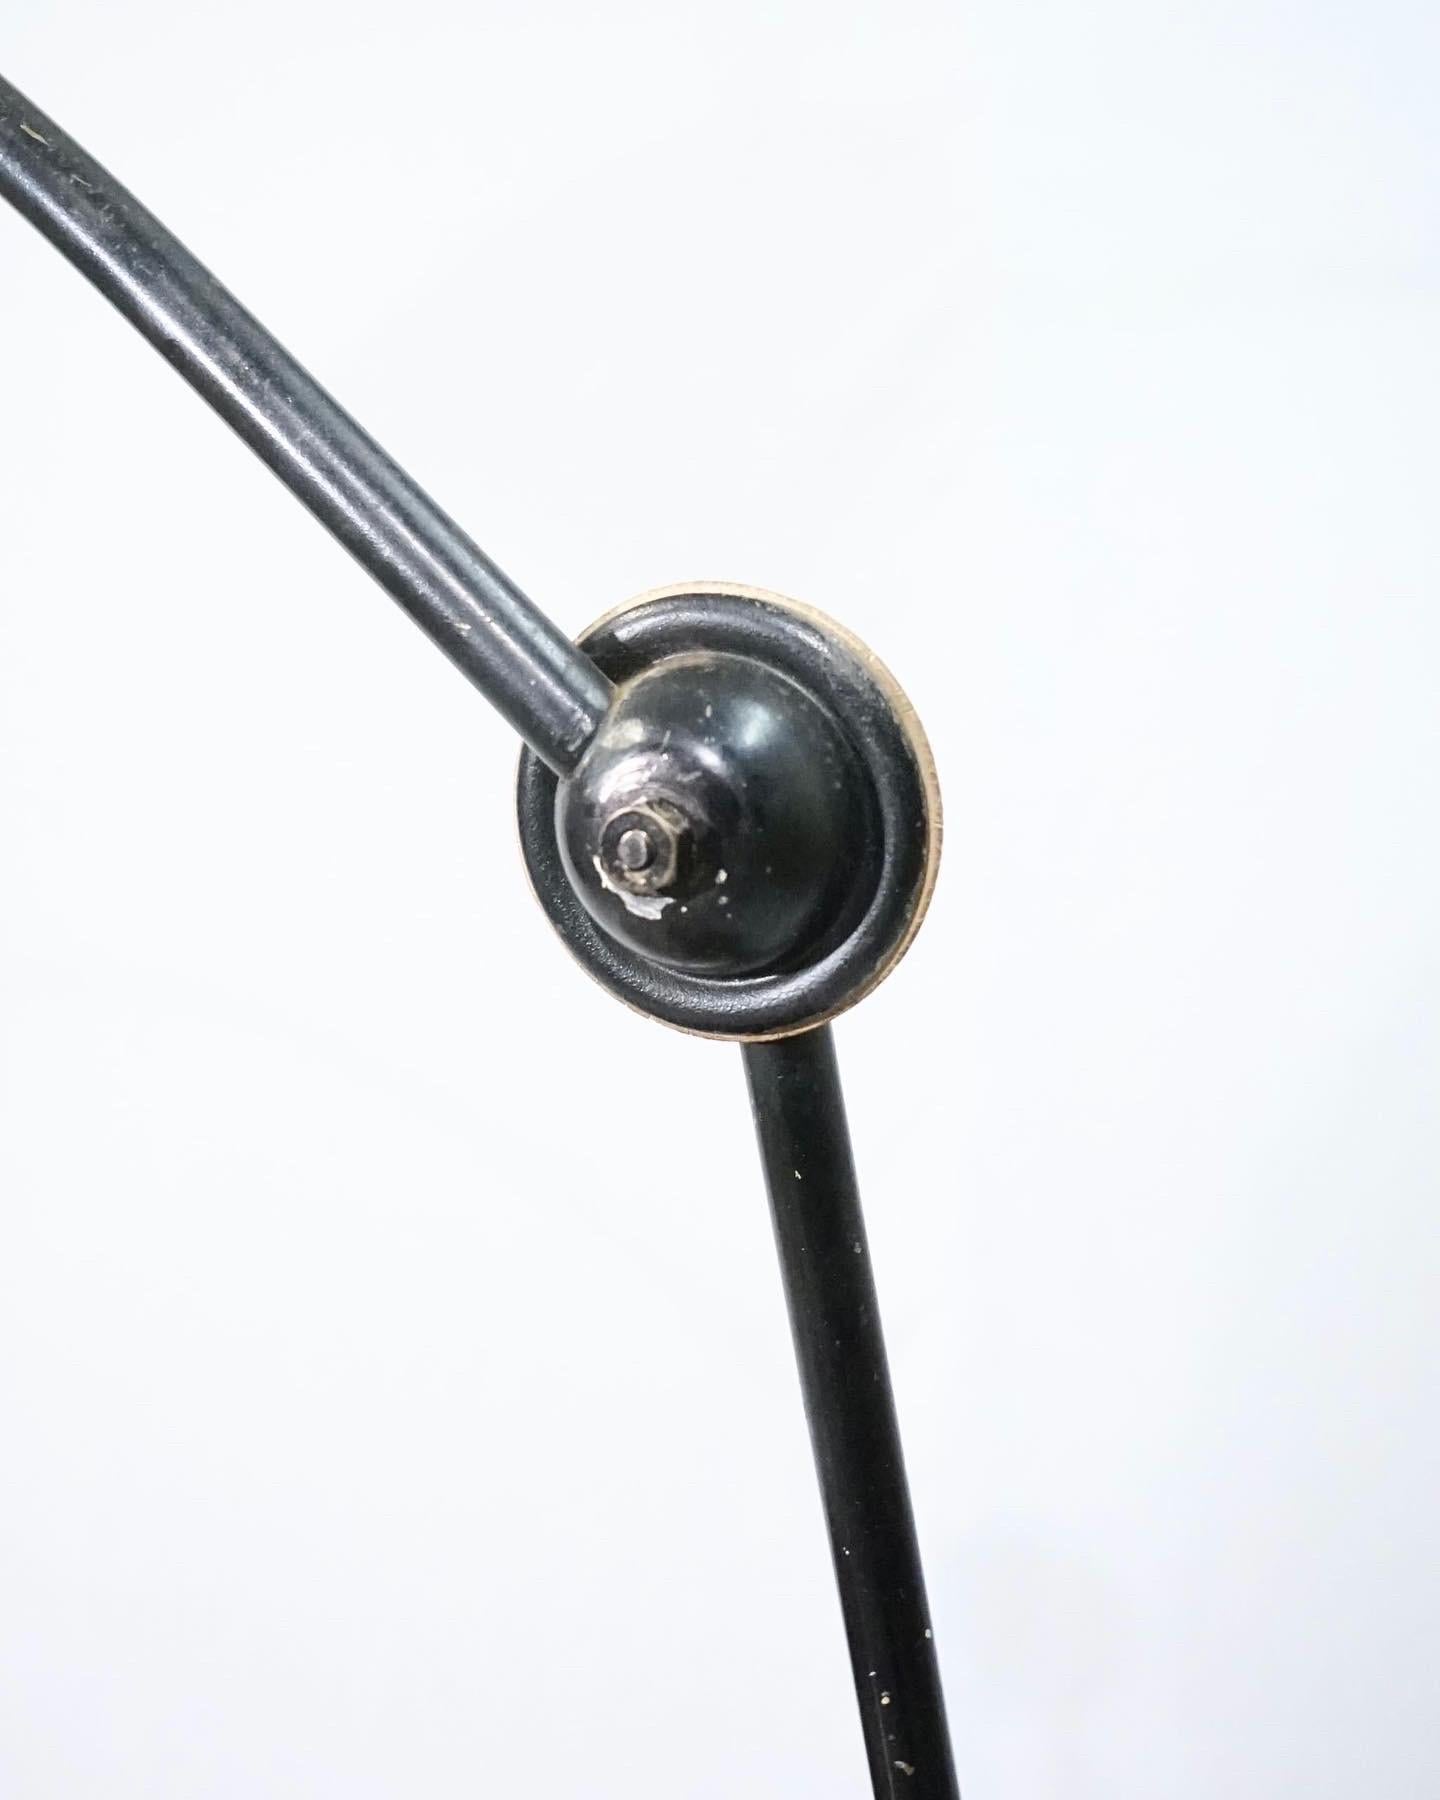 Work lamp attributed Vilhelm Lauritzen for Fog & Mørup from the 1950’s in original black lacquered metal, the lamp is Vilhelm Lauritzen’s variation of a architect lamp. The lamp is in good condition.

Vilhelm Lauritzen was one of the pioneers in